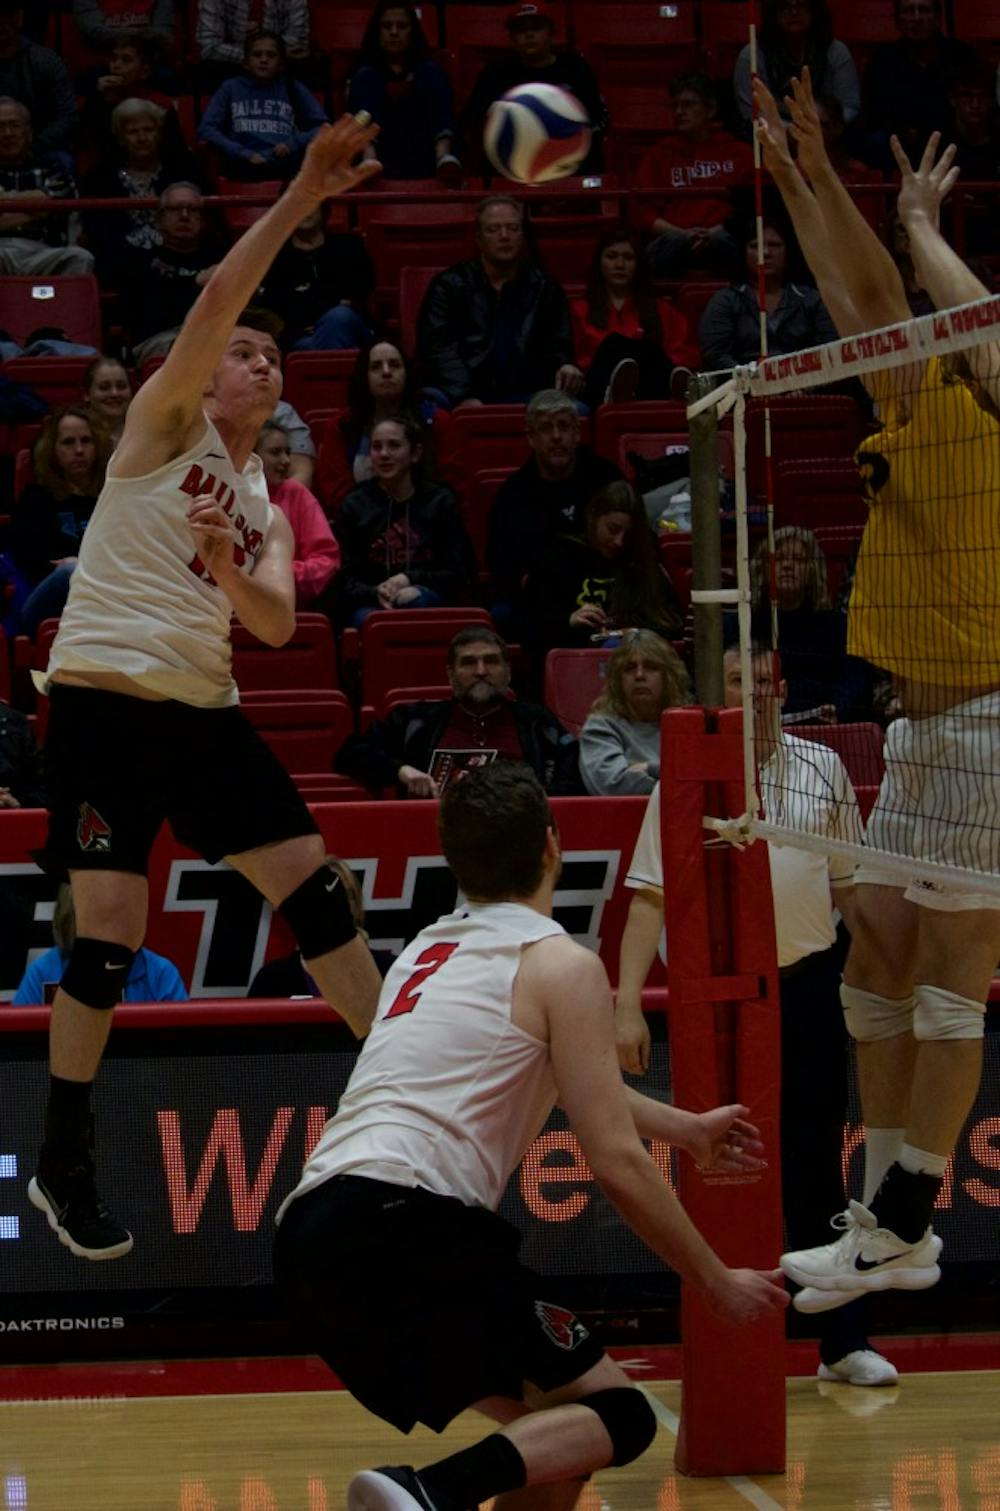 Ball State's mens volleyball team competed against Quincy March 31 in John E. Worthen Arena. The Cardinals won 3-0.&nbsp;